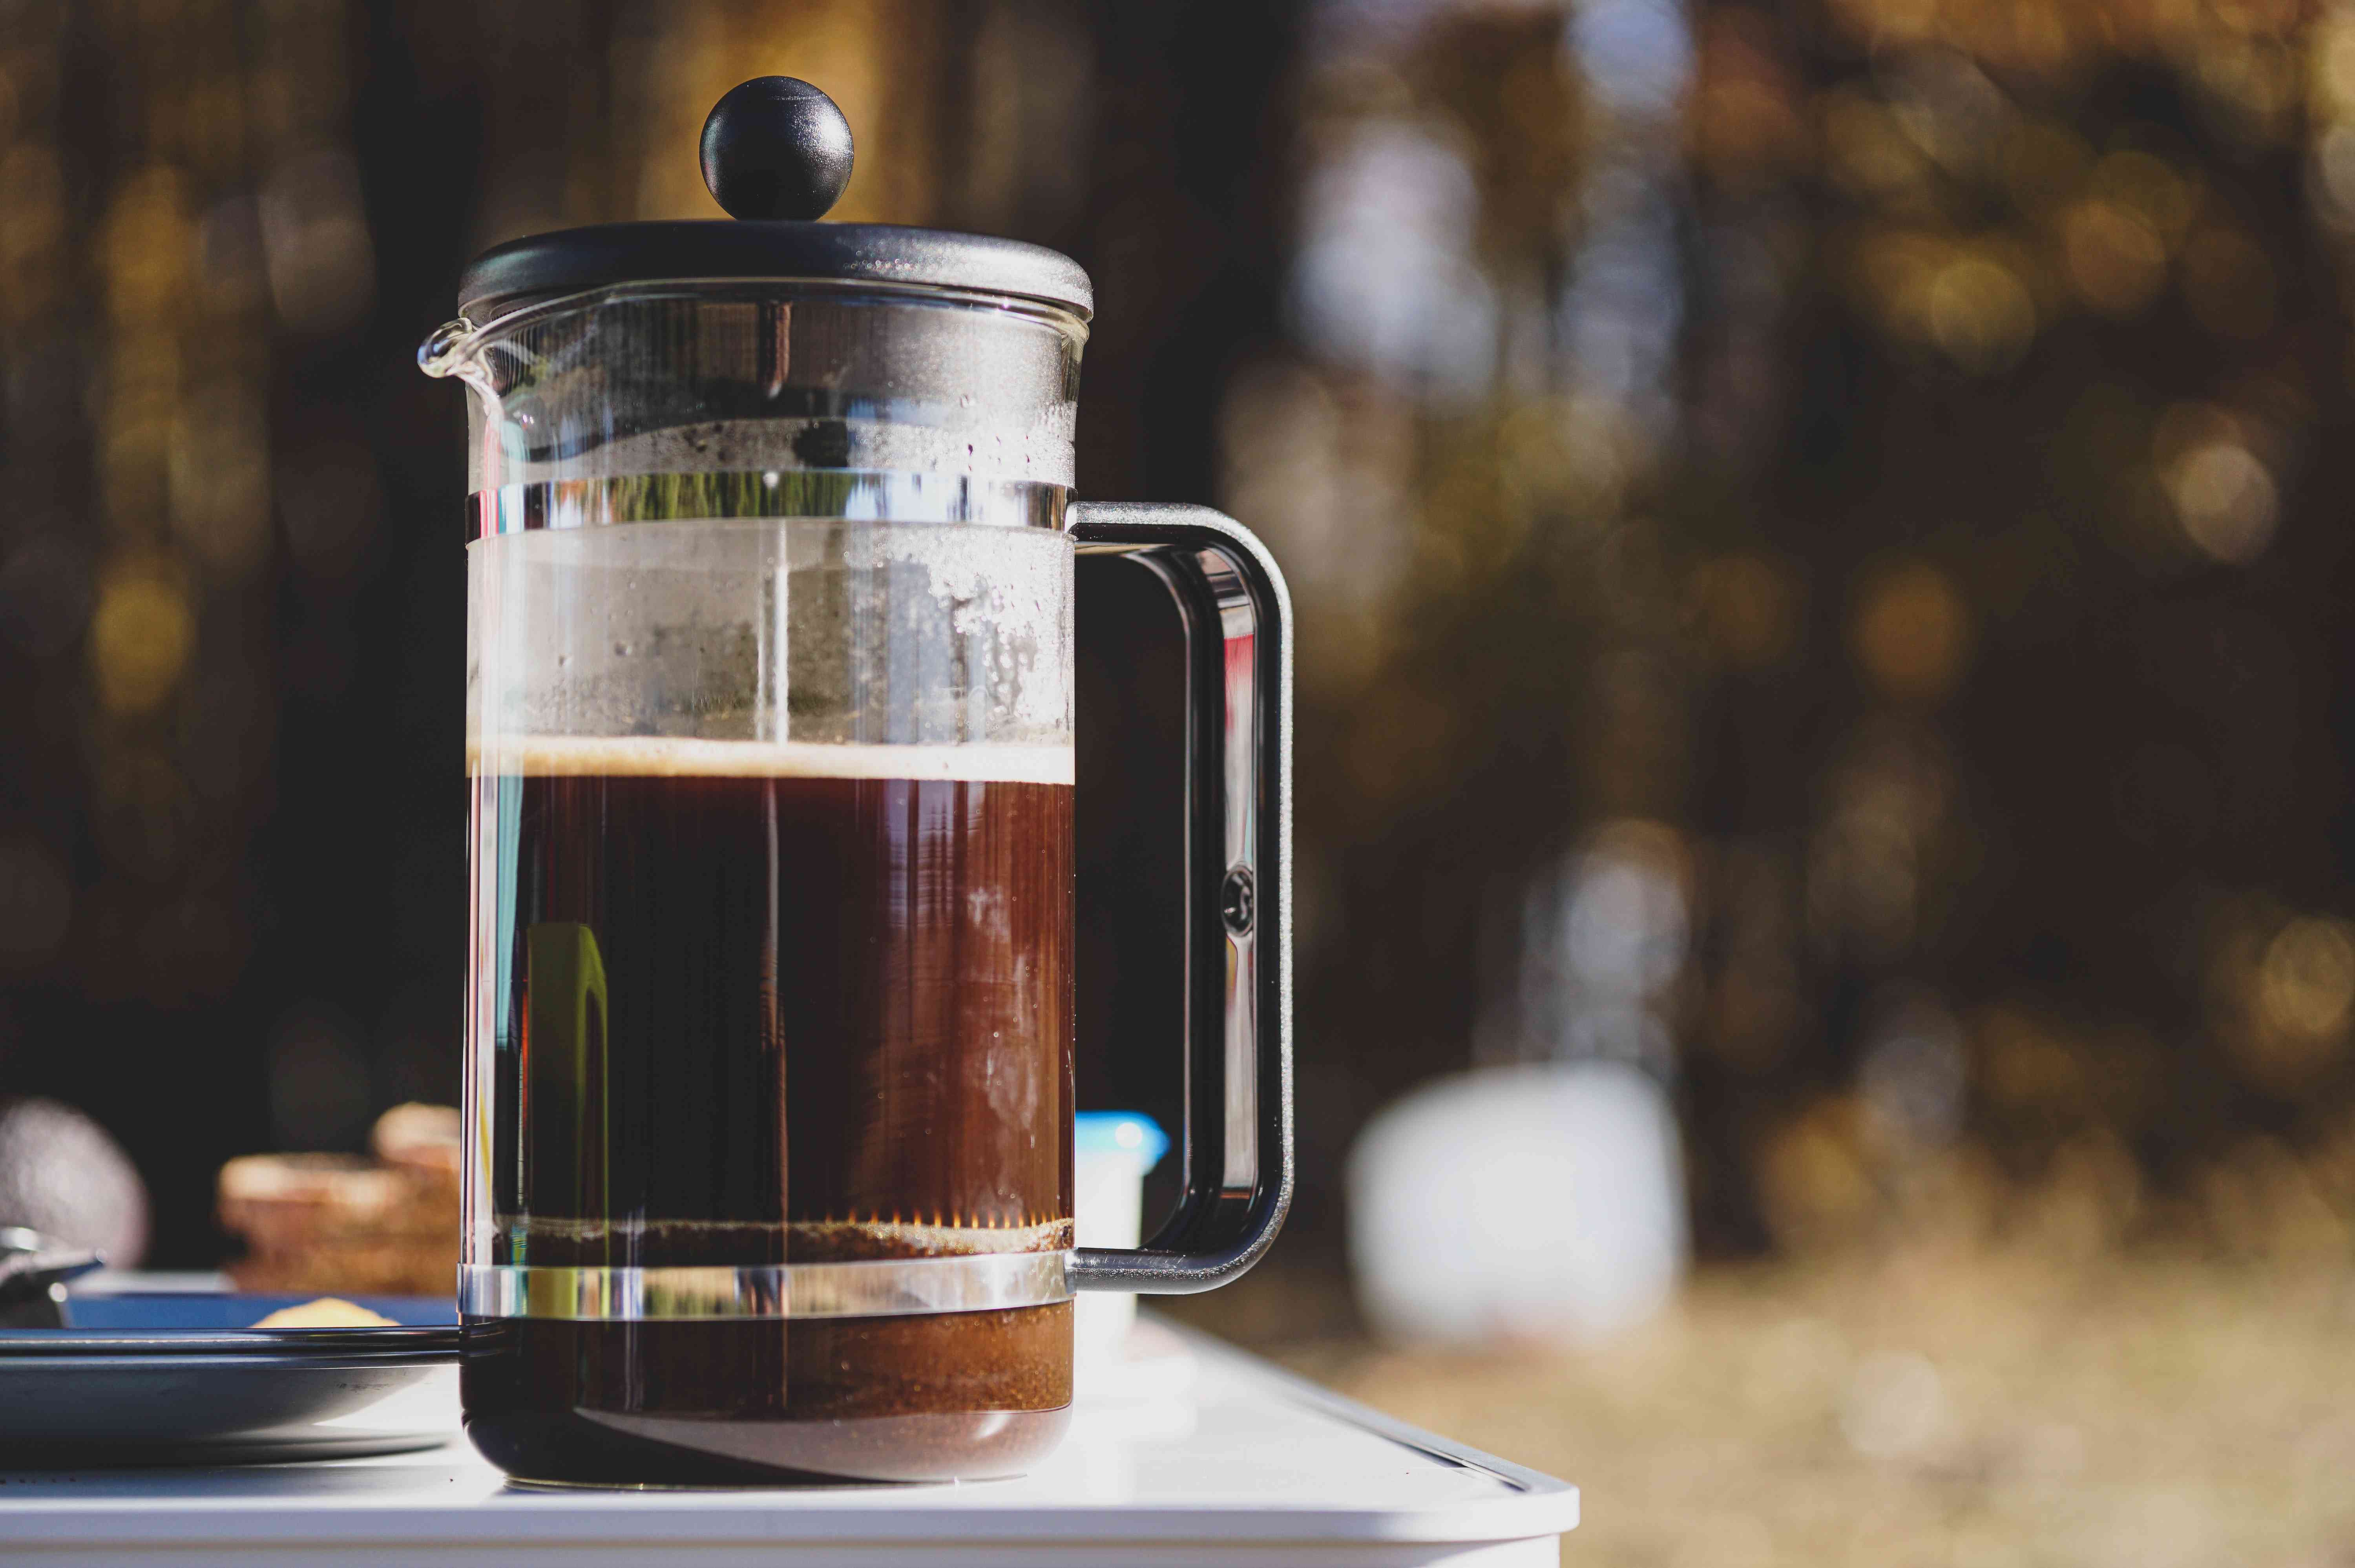 Portable coffee maker such as french press would make for a unique and valuable present for your coffee-loving sweetheart